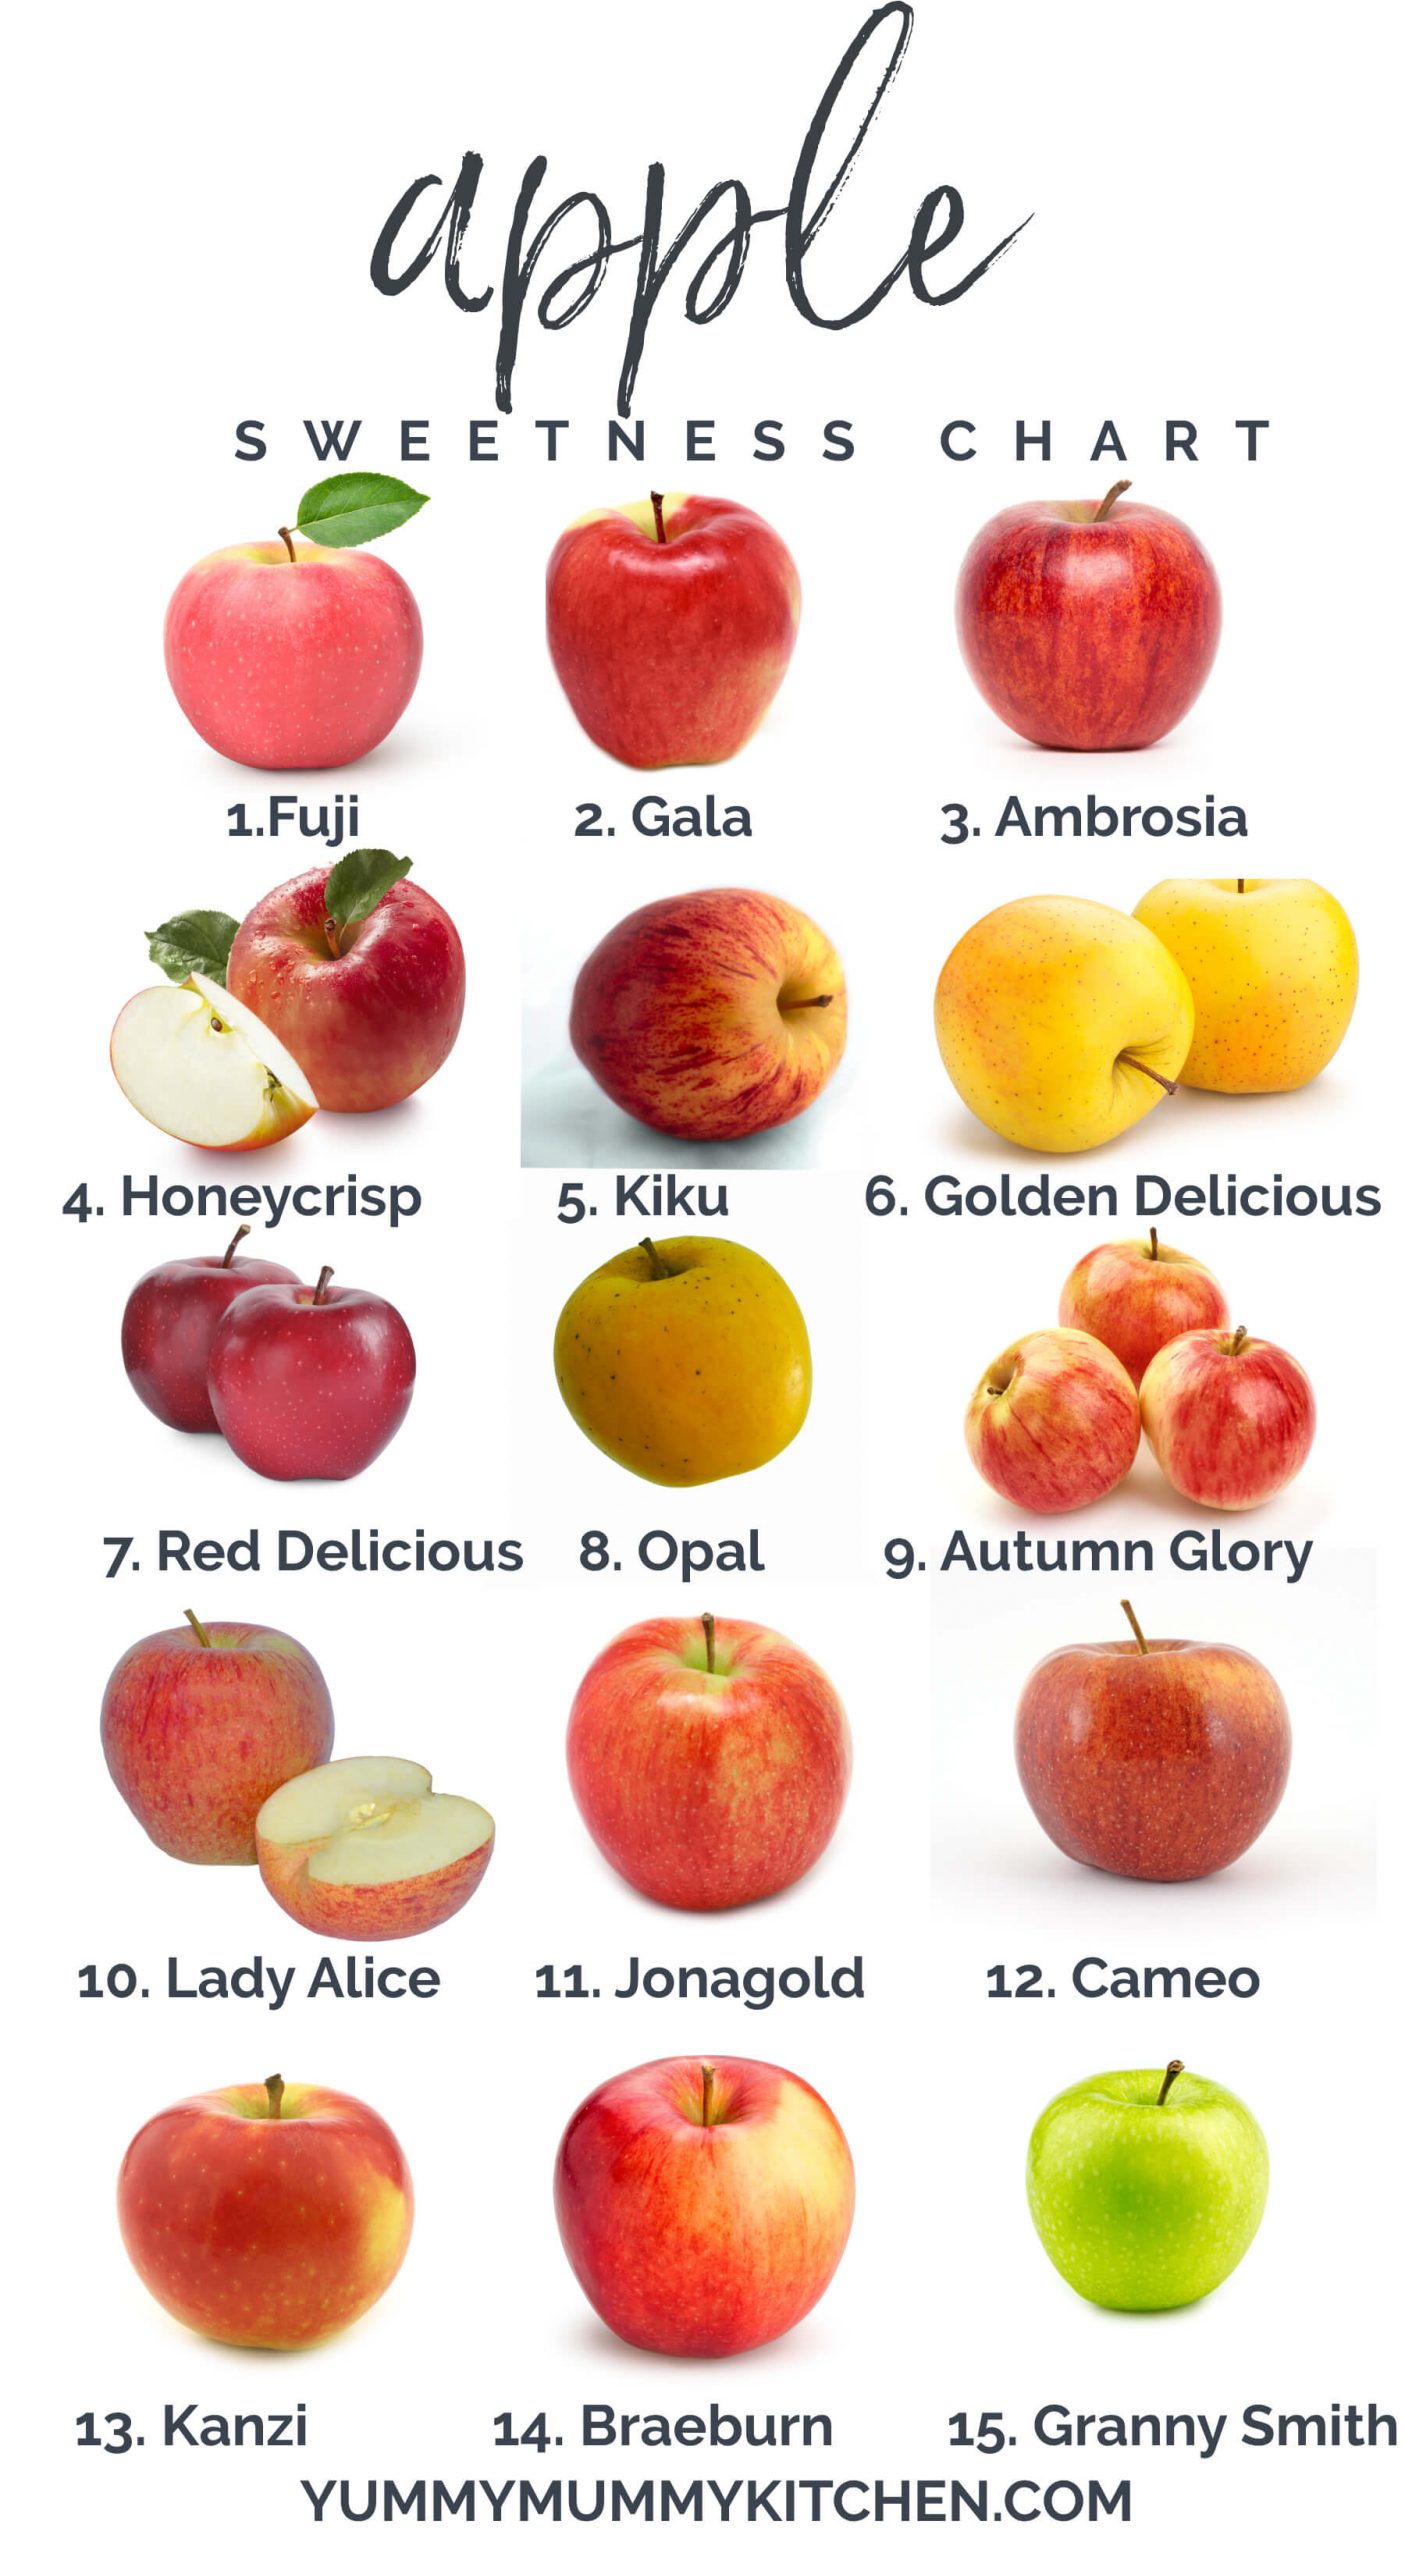 Apple Sweetness Chart - Top Types of Apples and How to Use